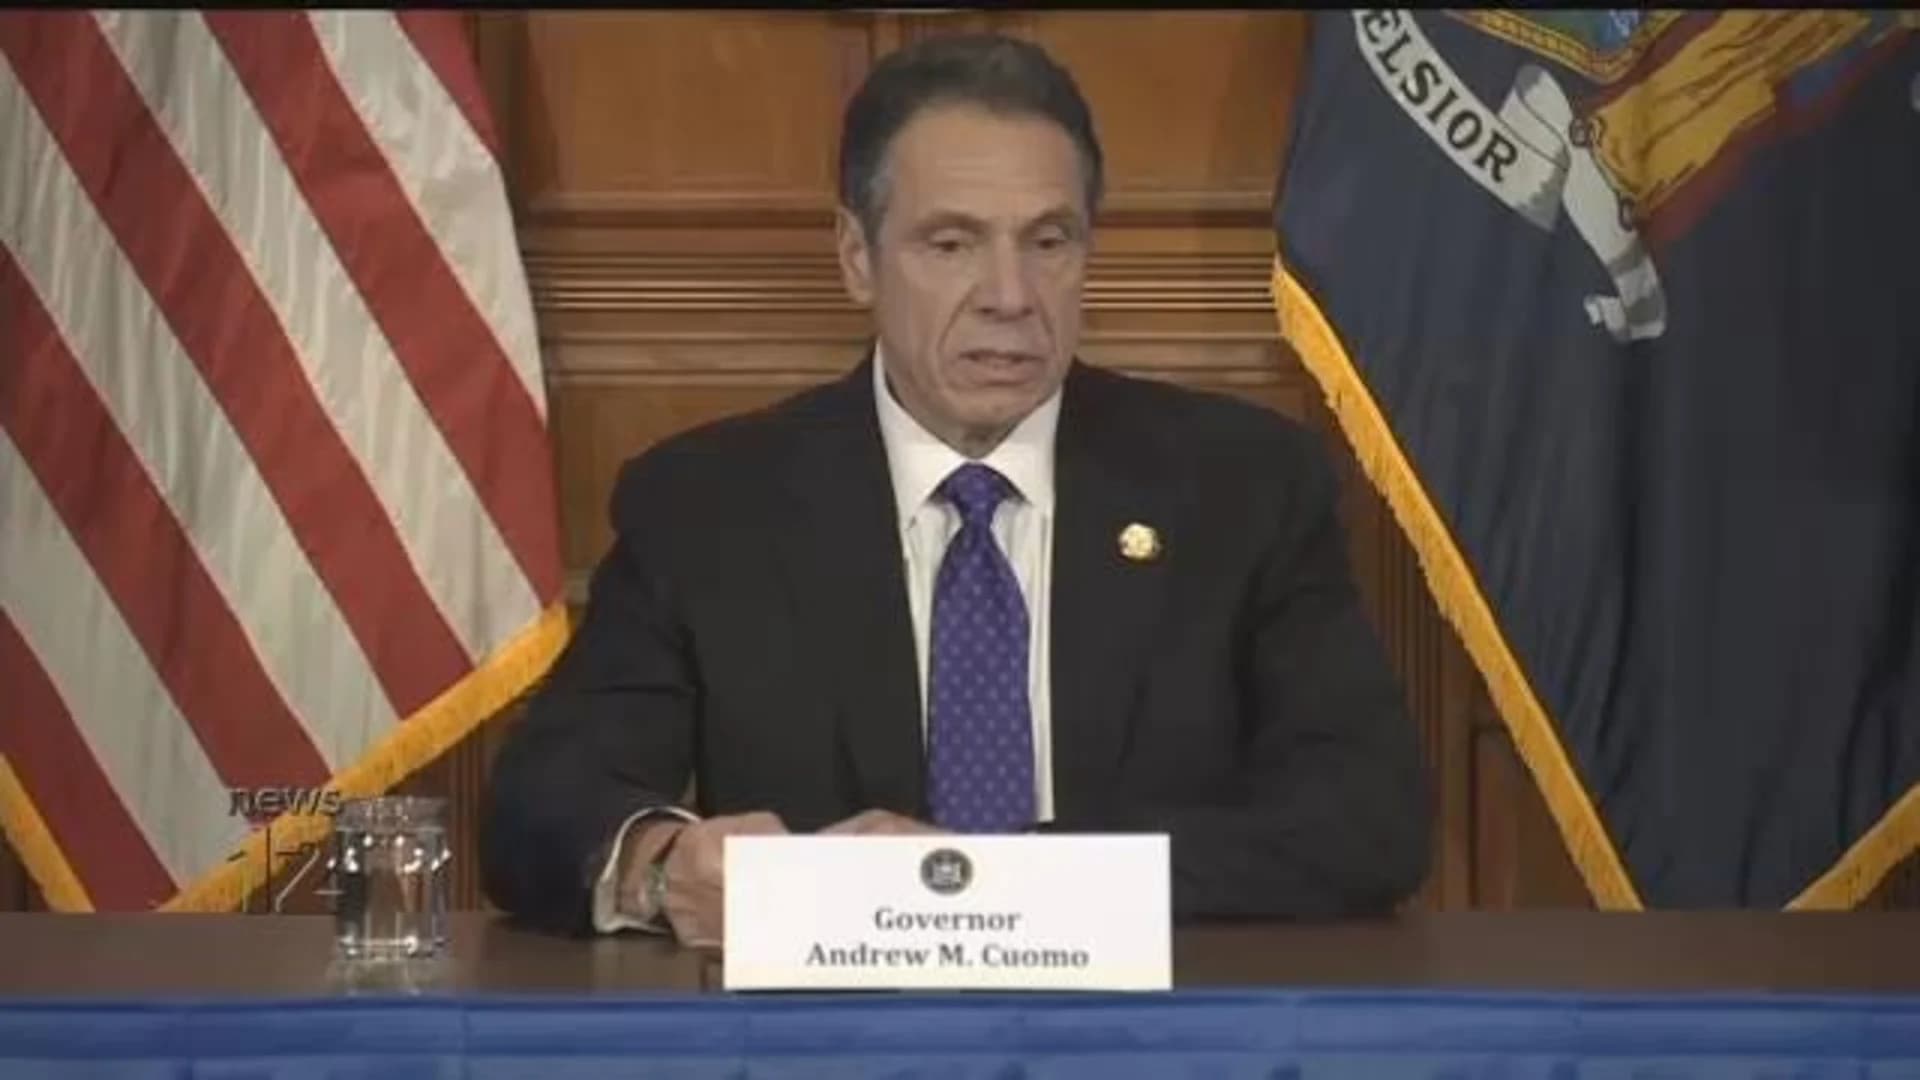 'Cautiously optimistic.' Gov. Cuomo says 'we are slowing the infection rate' in New York